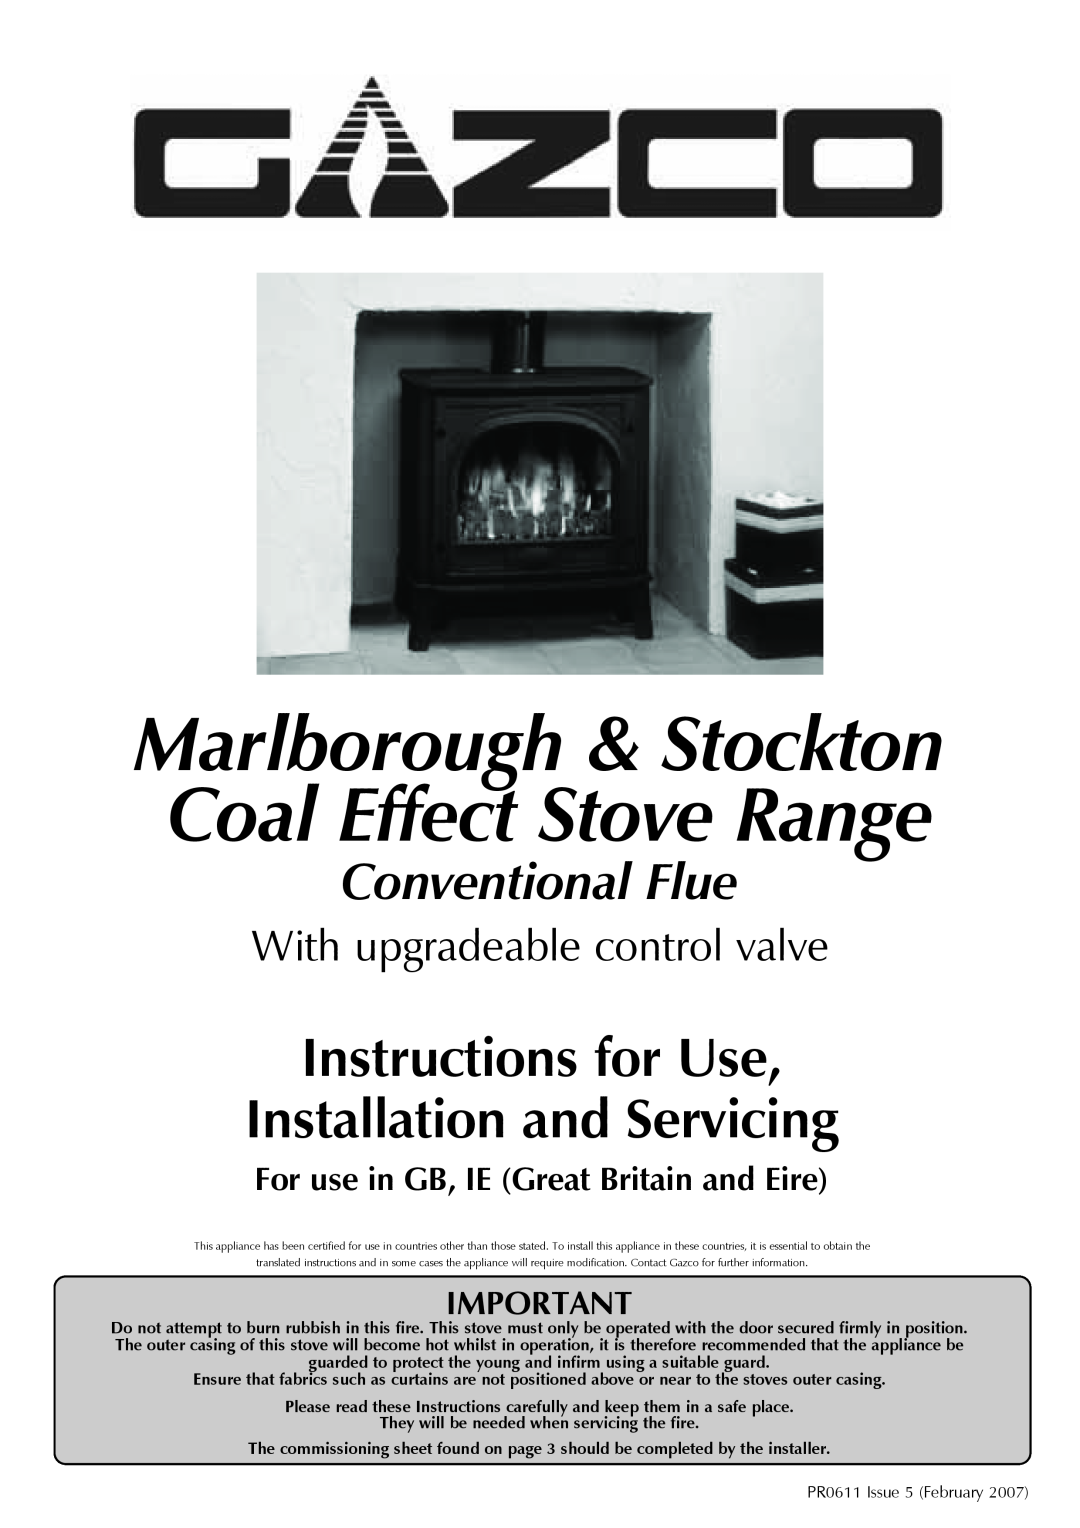 Stovax manual Marlborough & Stockton Coal Effect Stove Range, Instructions for Use Installation and Servicing 